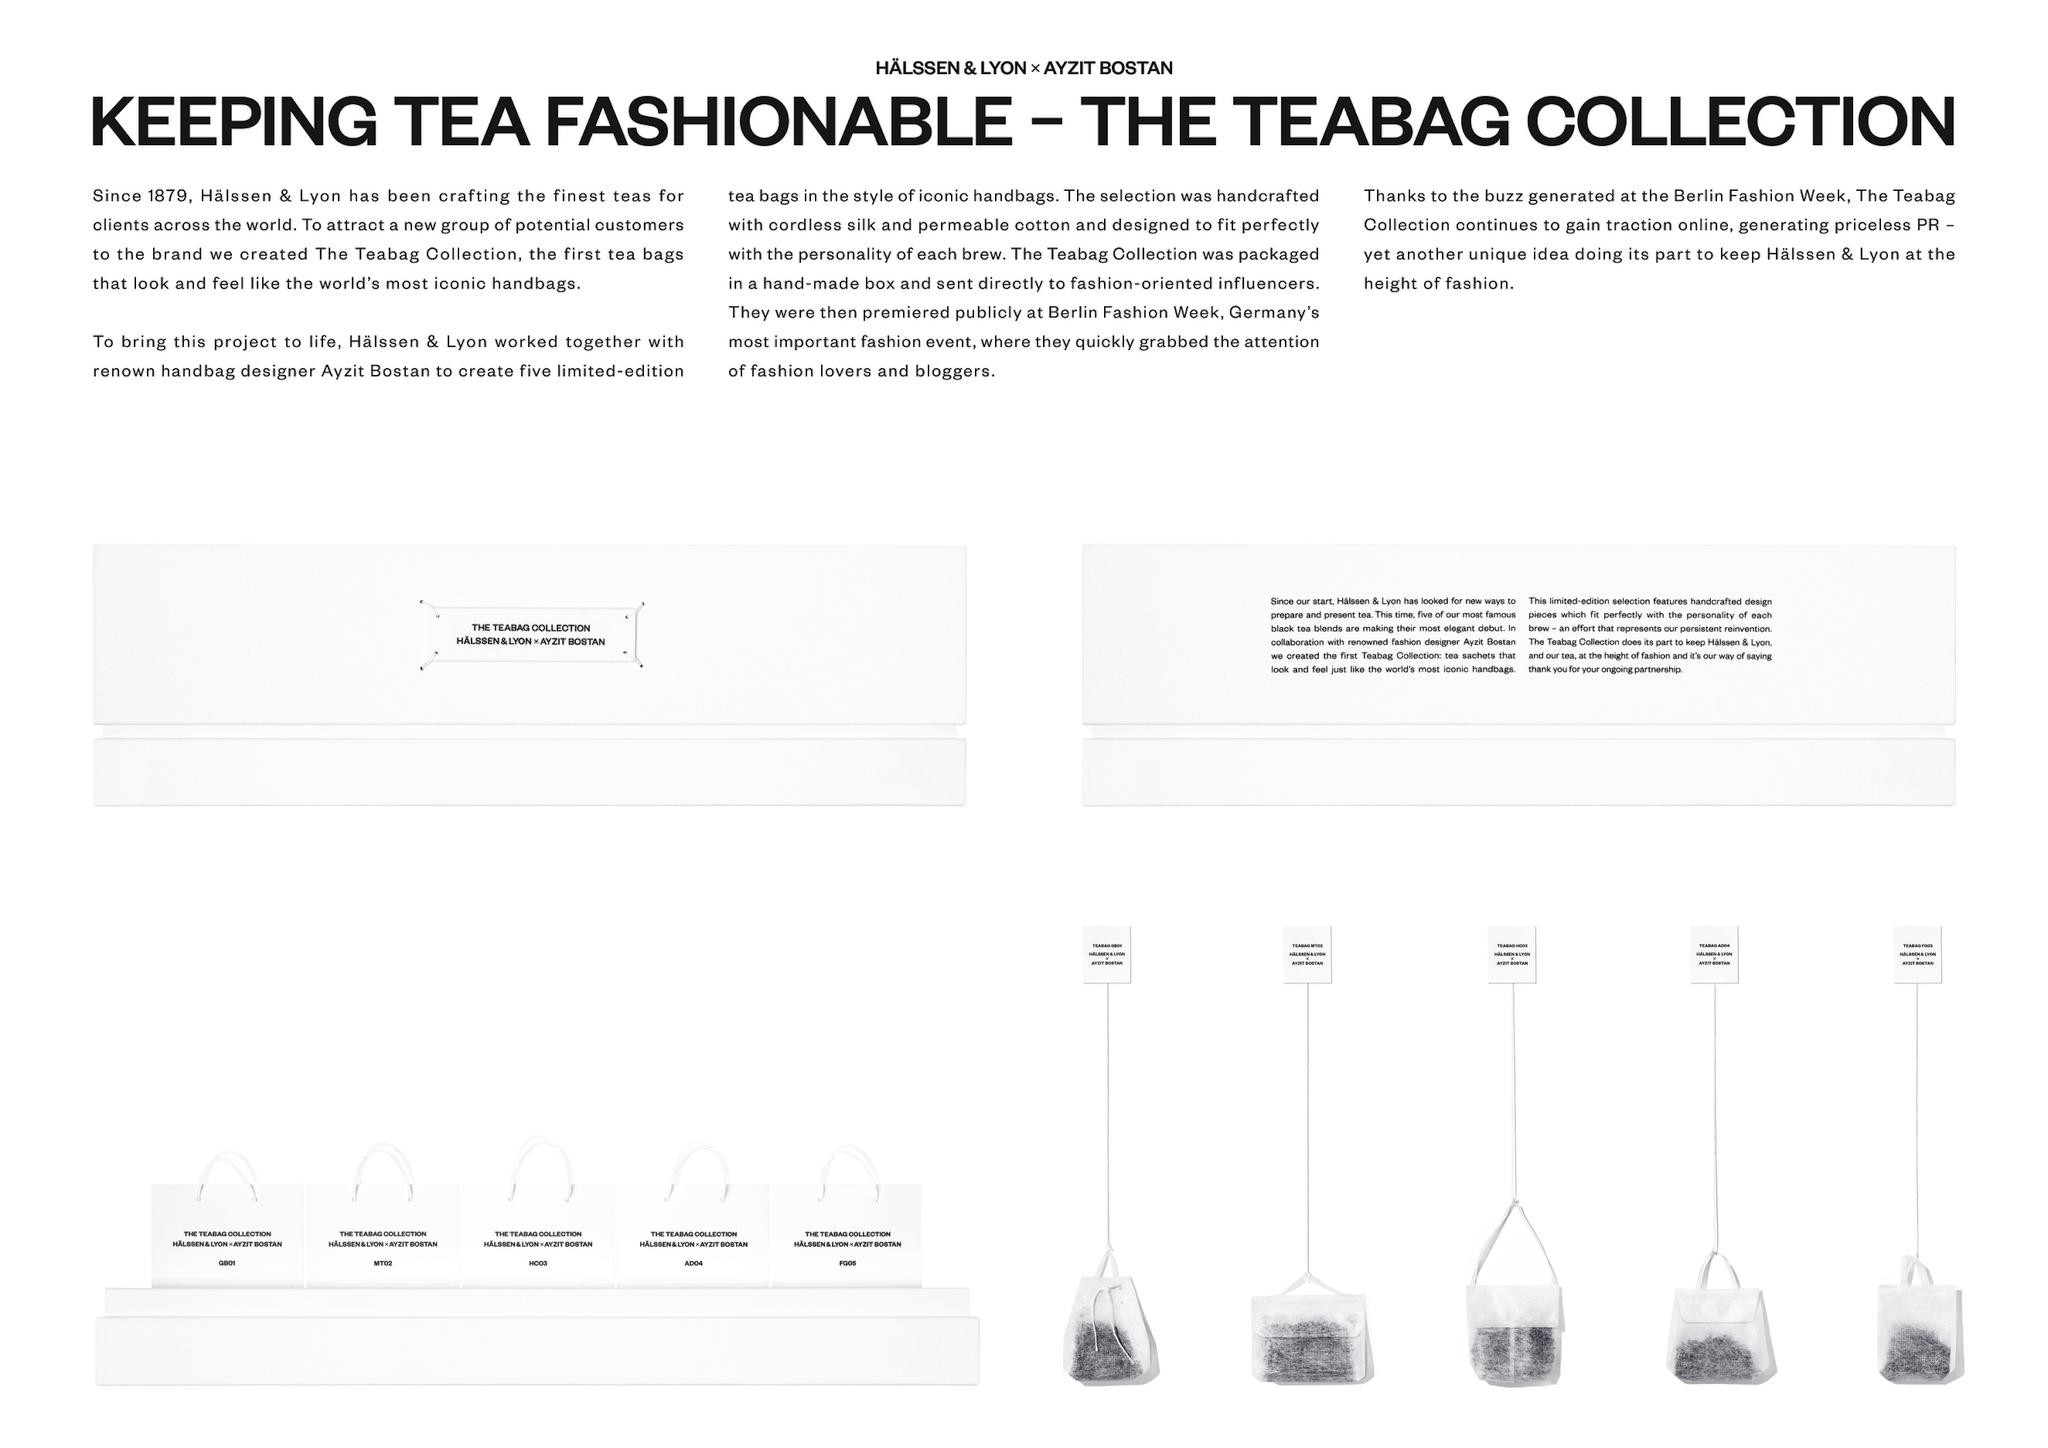 The Teabag Collection